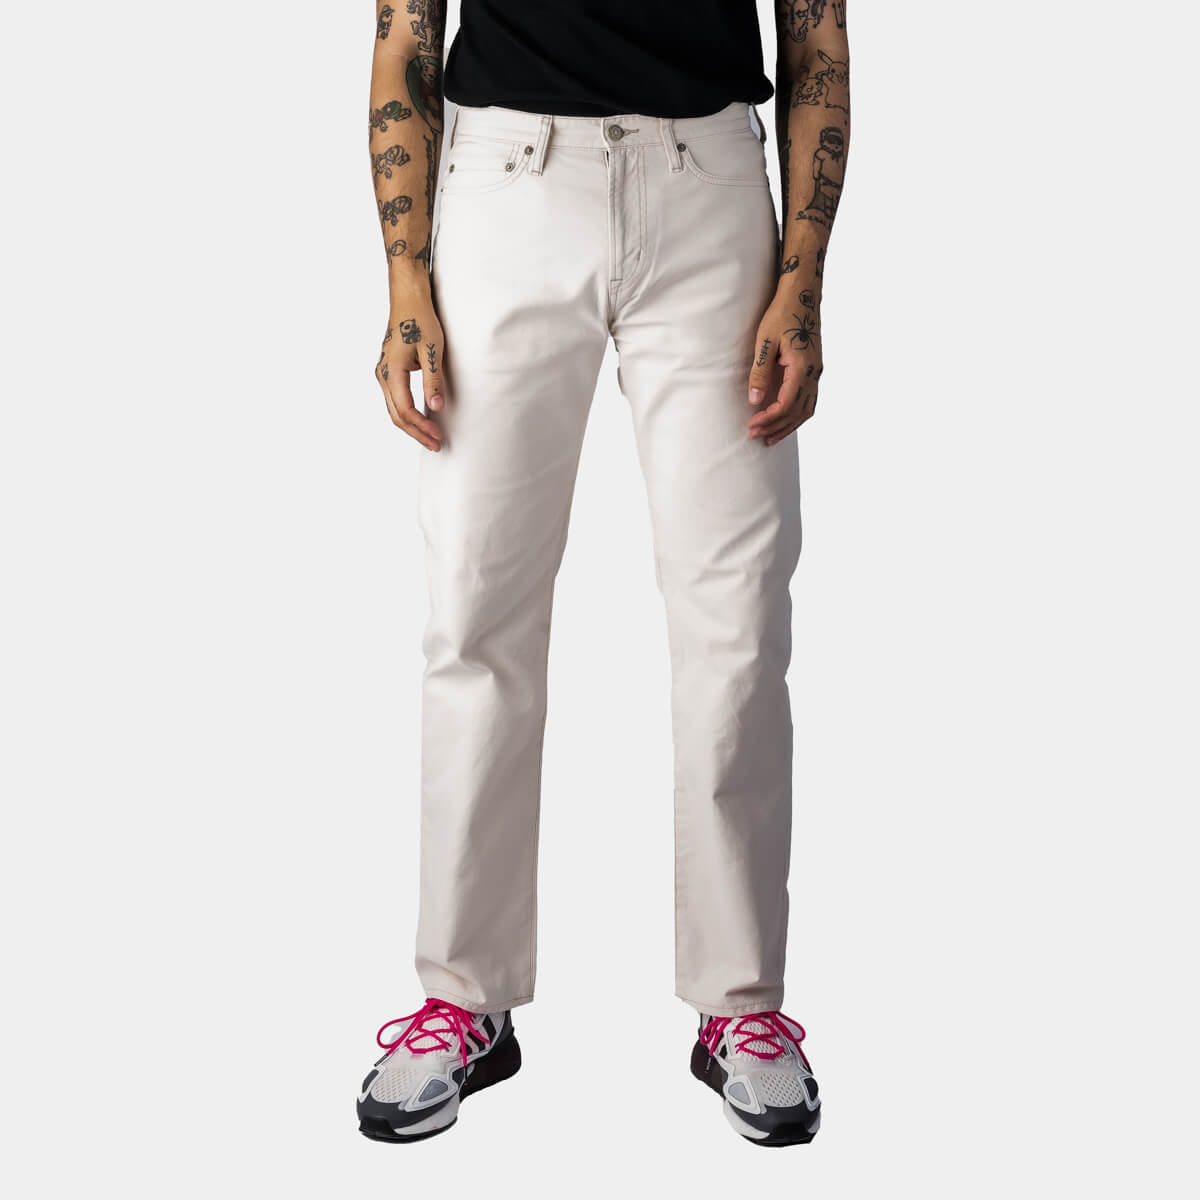 RATS Duck 5Pocket Pants in Ivory | Sonder Supplies